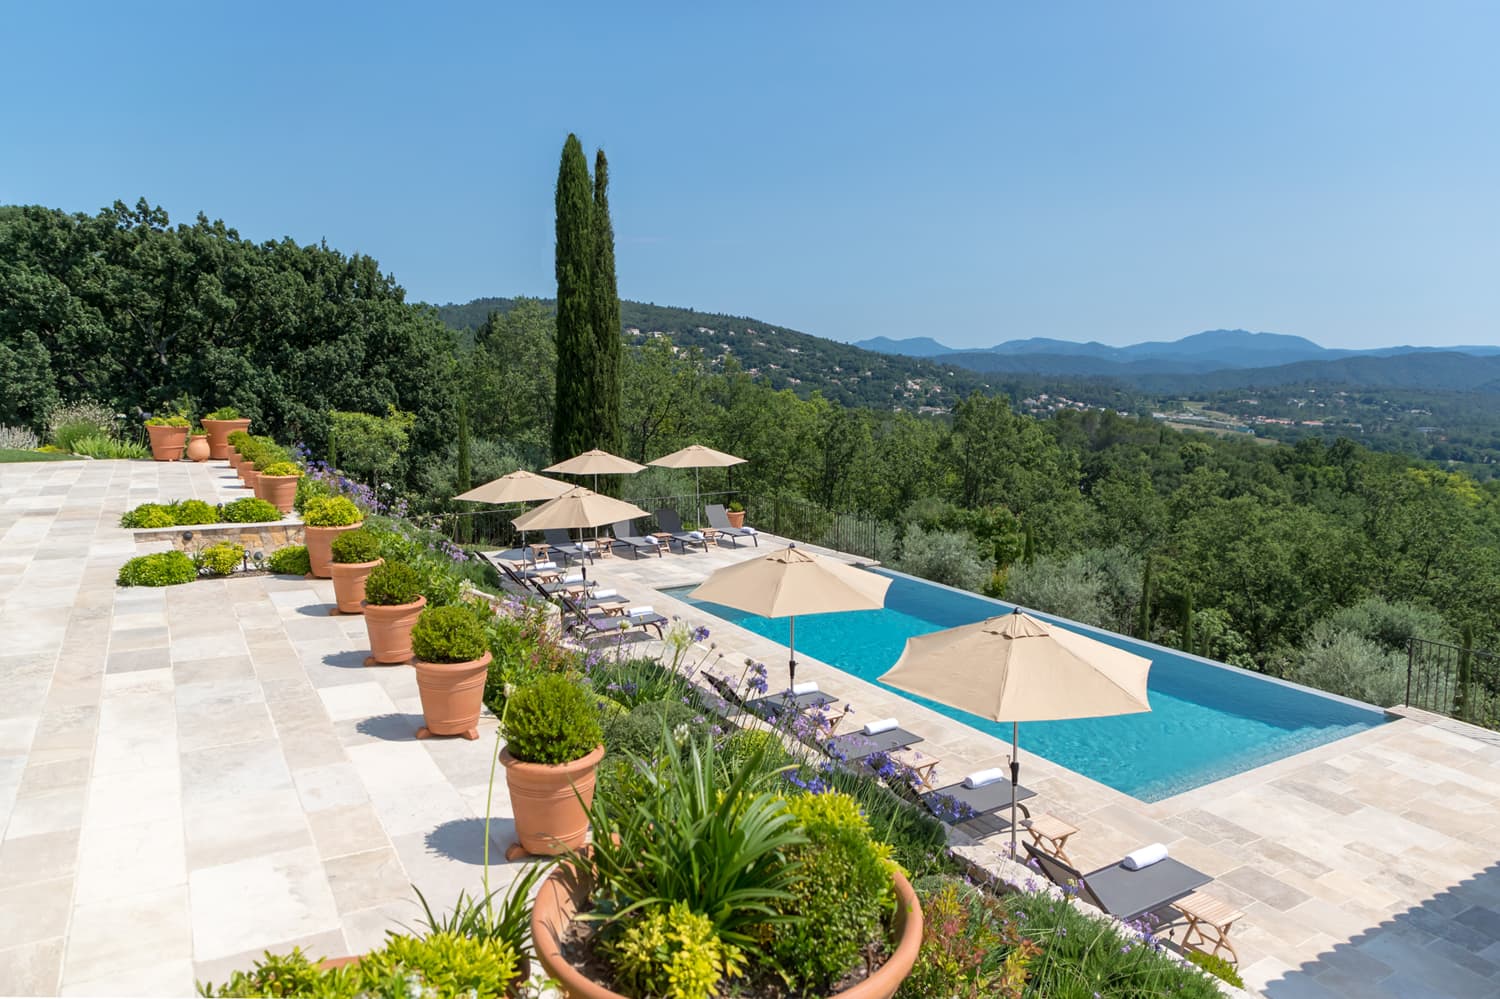 Holiday home in Provence, Côte d'Azur with private swimming pool | Le Grand Mas de Valcros